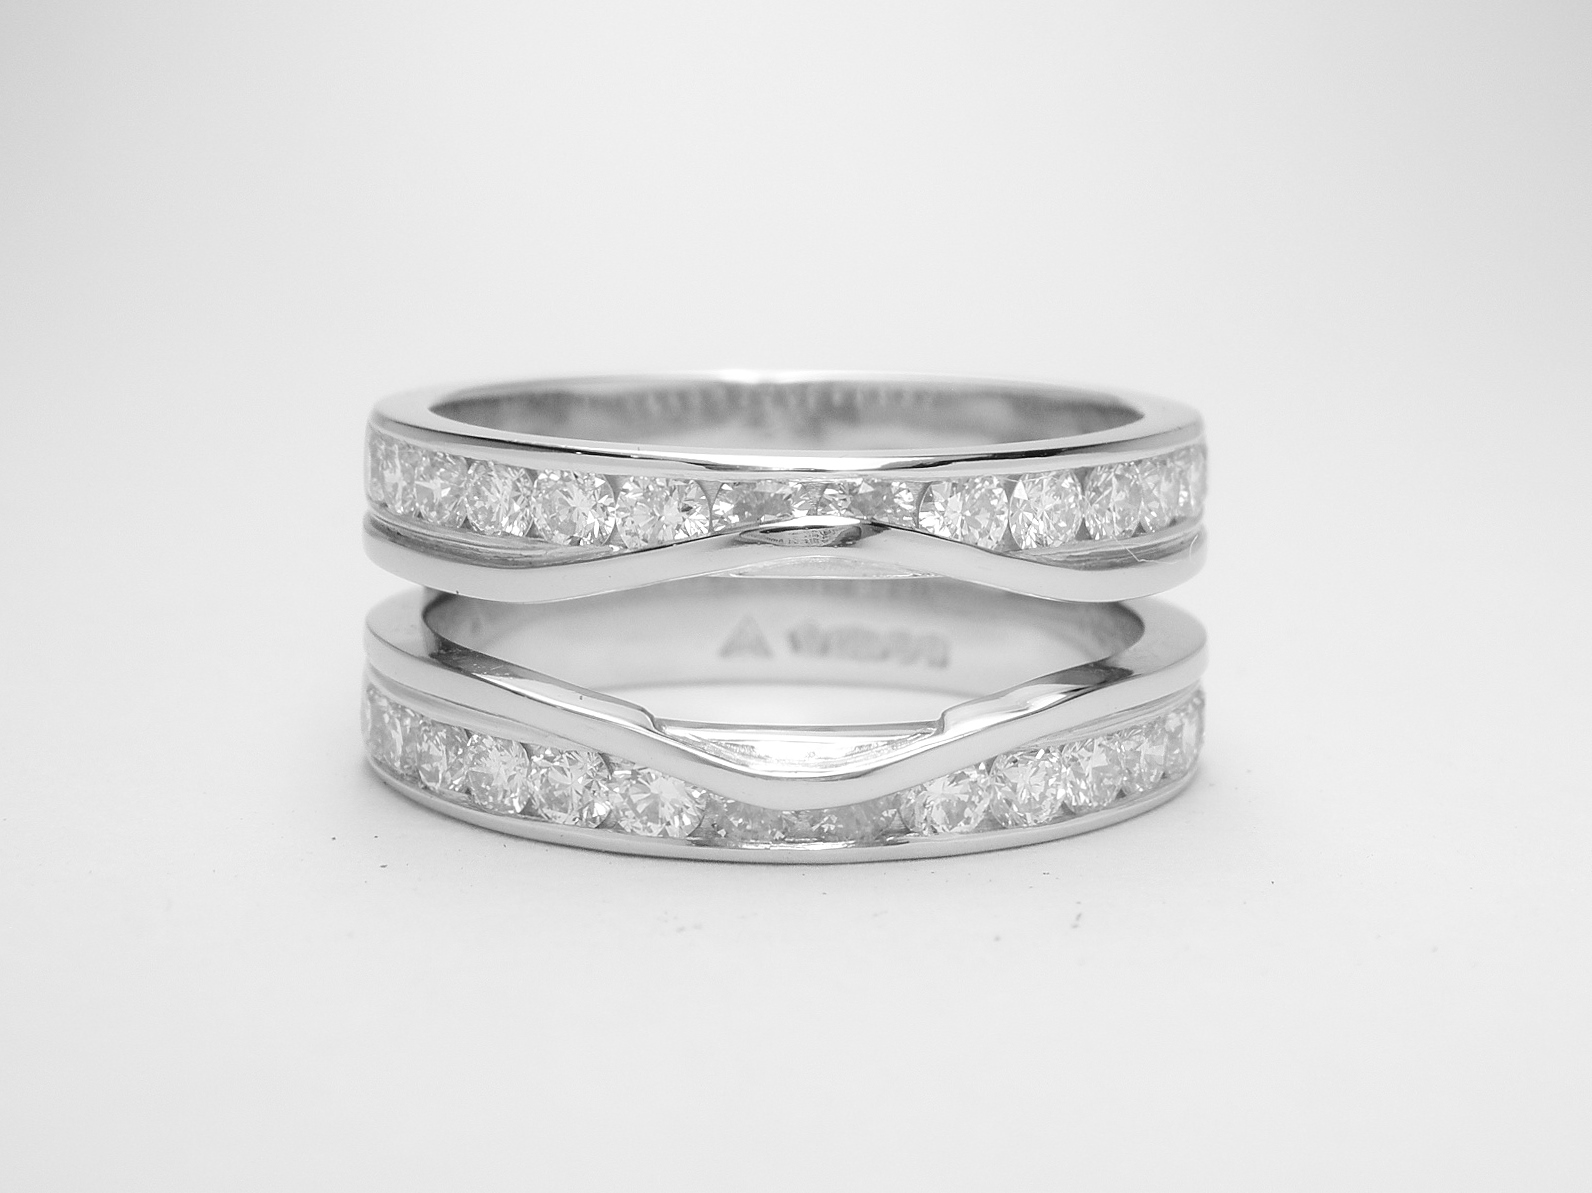 Double 'Embrace' platinum wedding ring channel set with round brilliant diamonds & created to receive the insertion of a phoenix cut and baguette diamond.